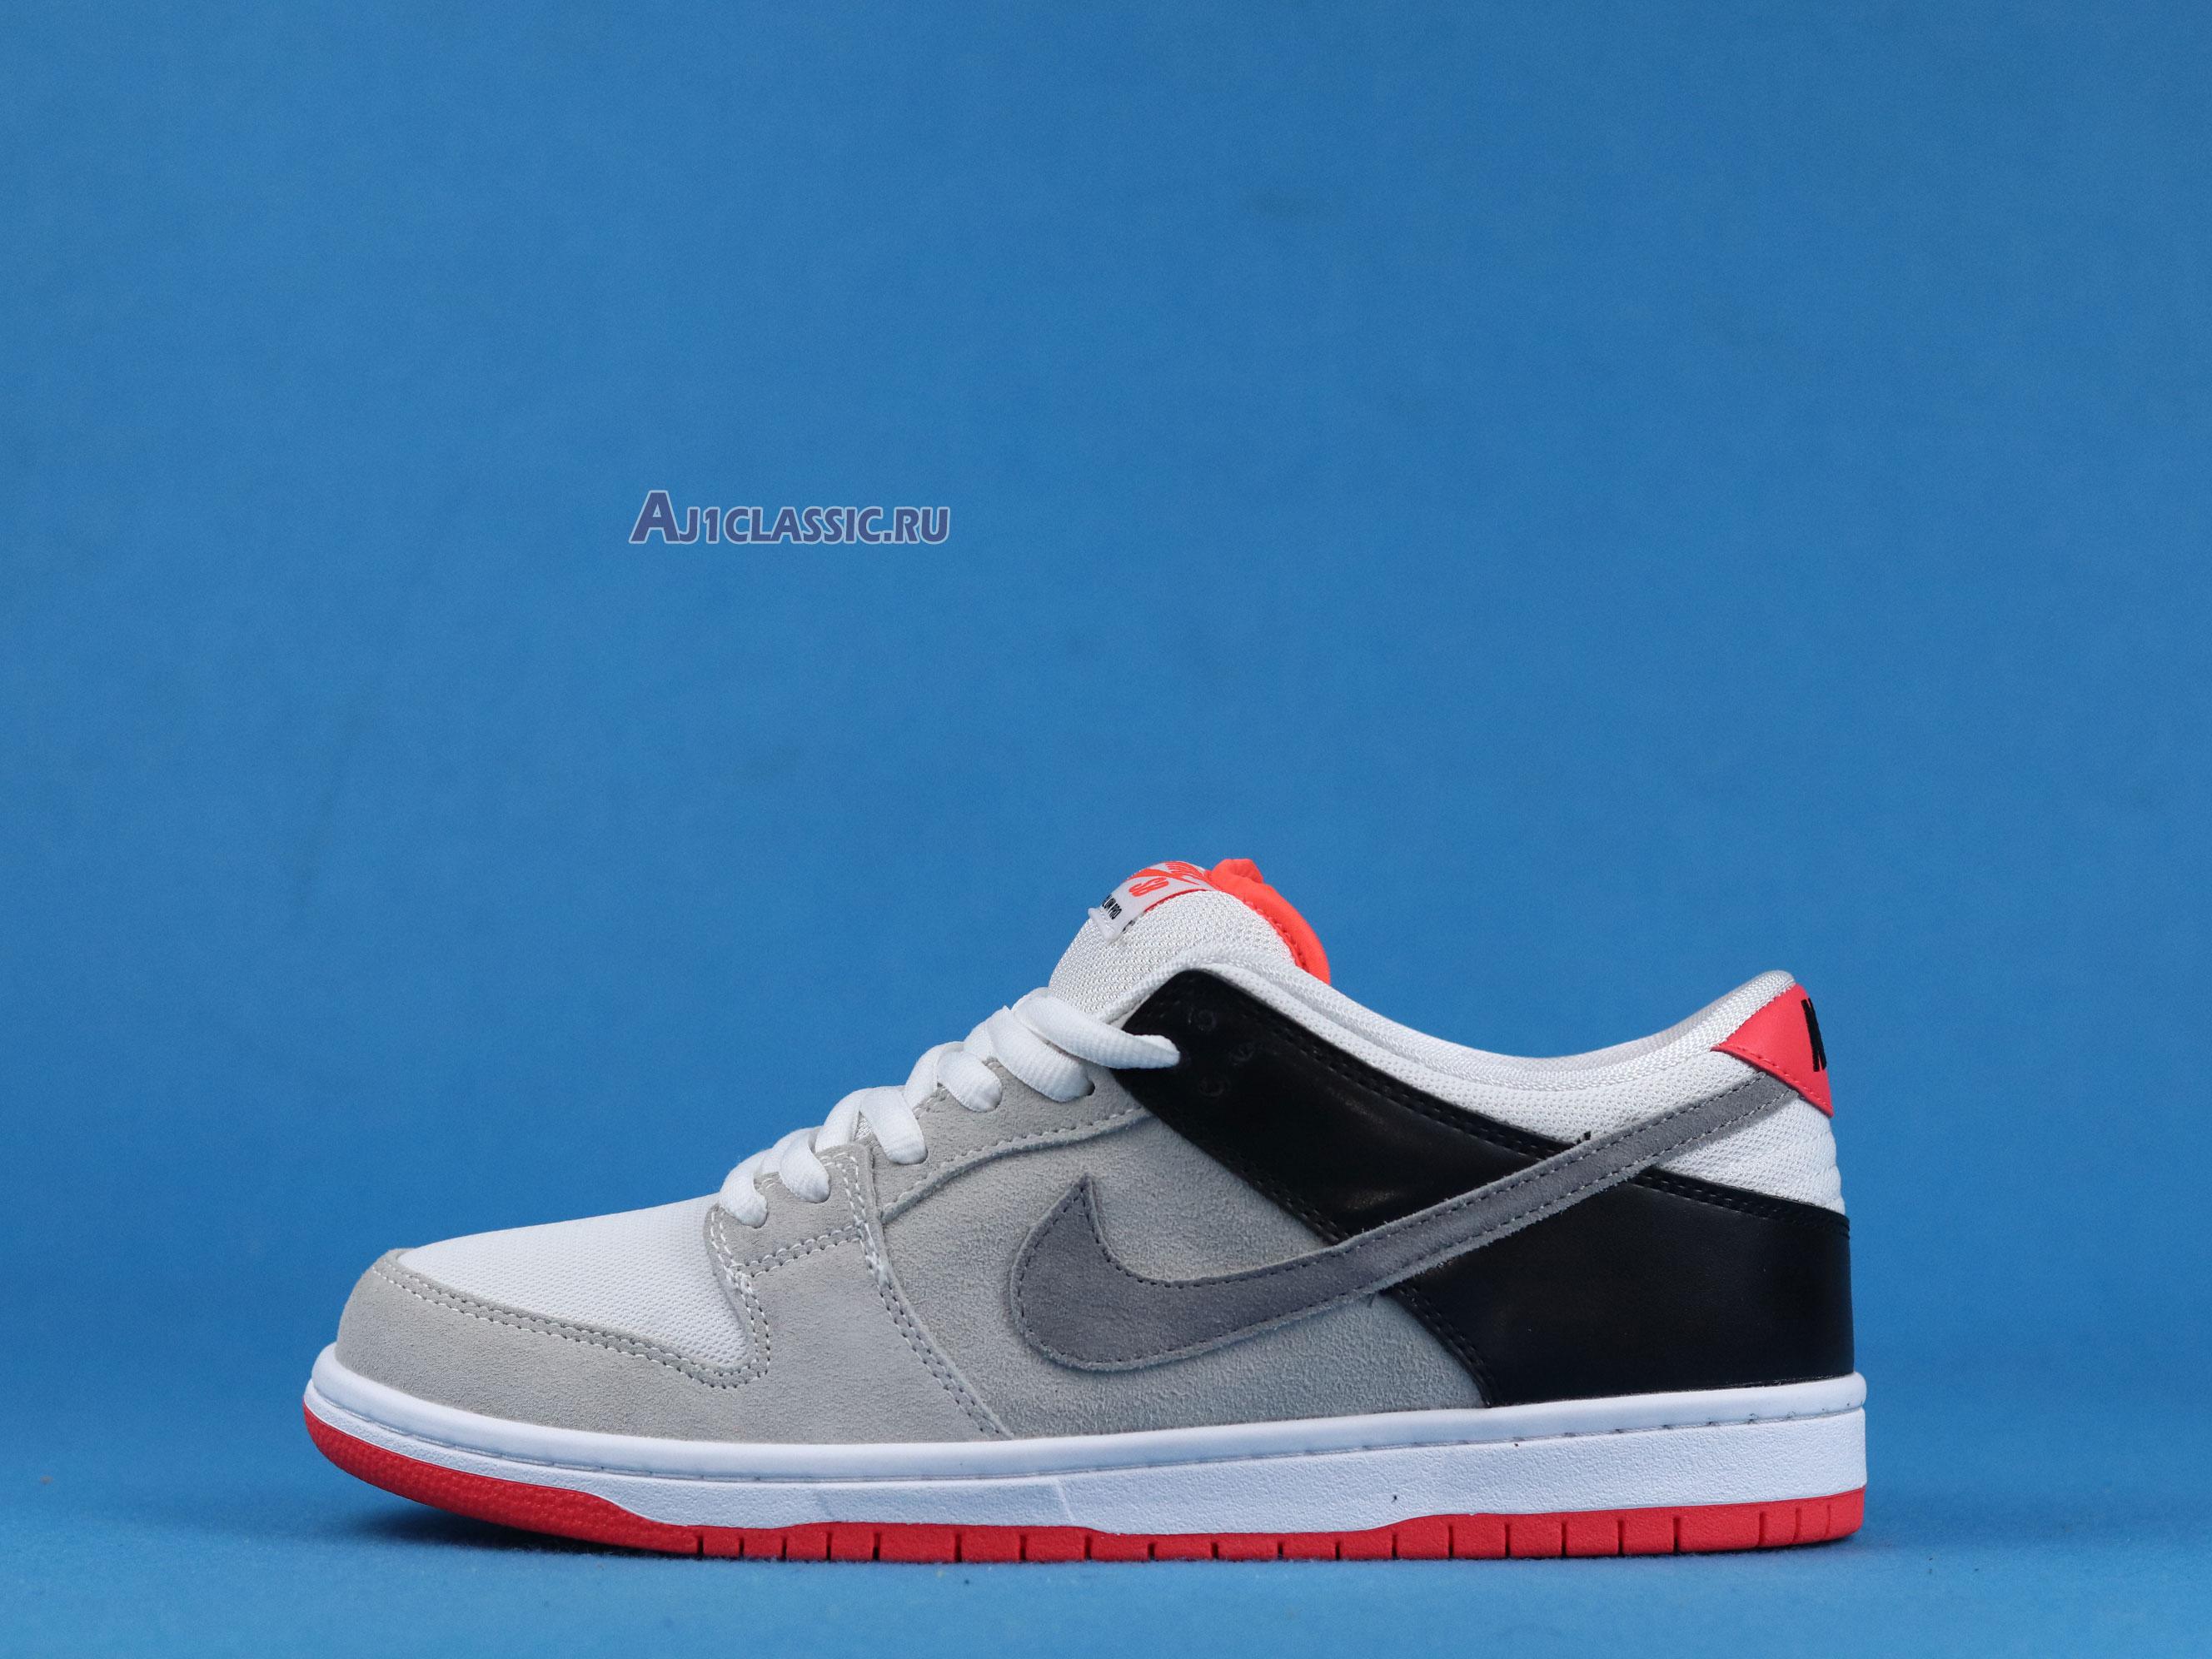 Nike Dunk Low SB "AM90 Infrared" CD2563-004